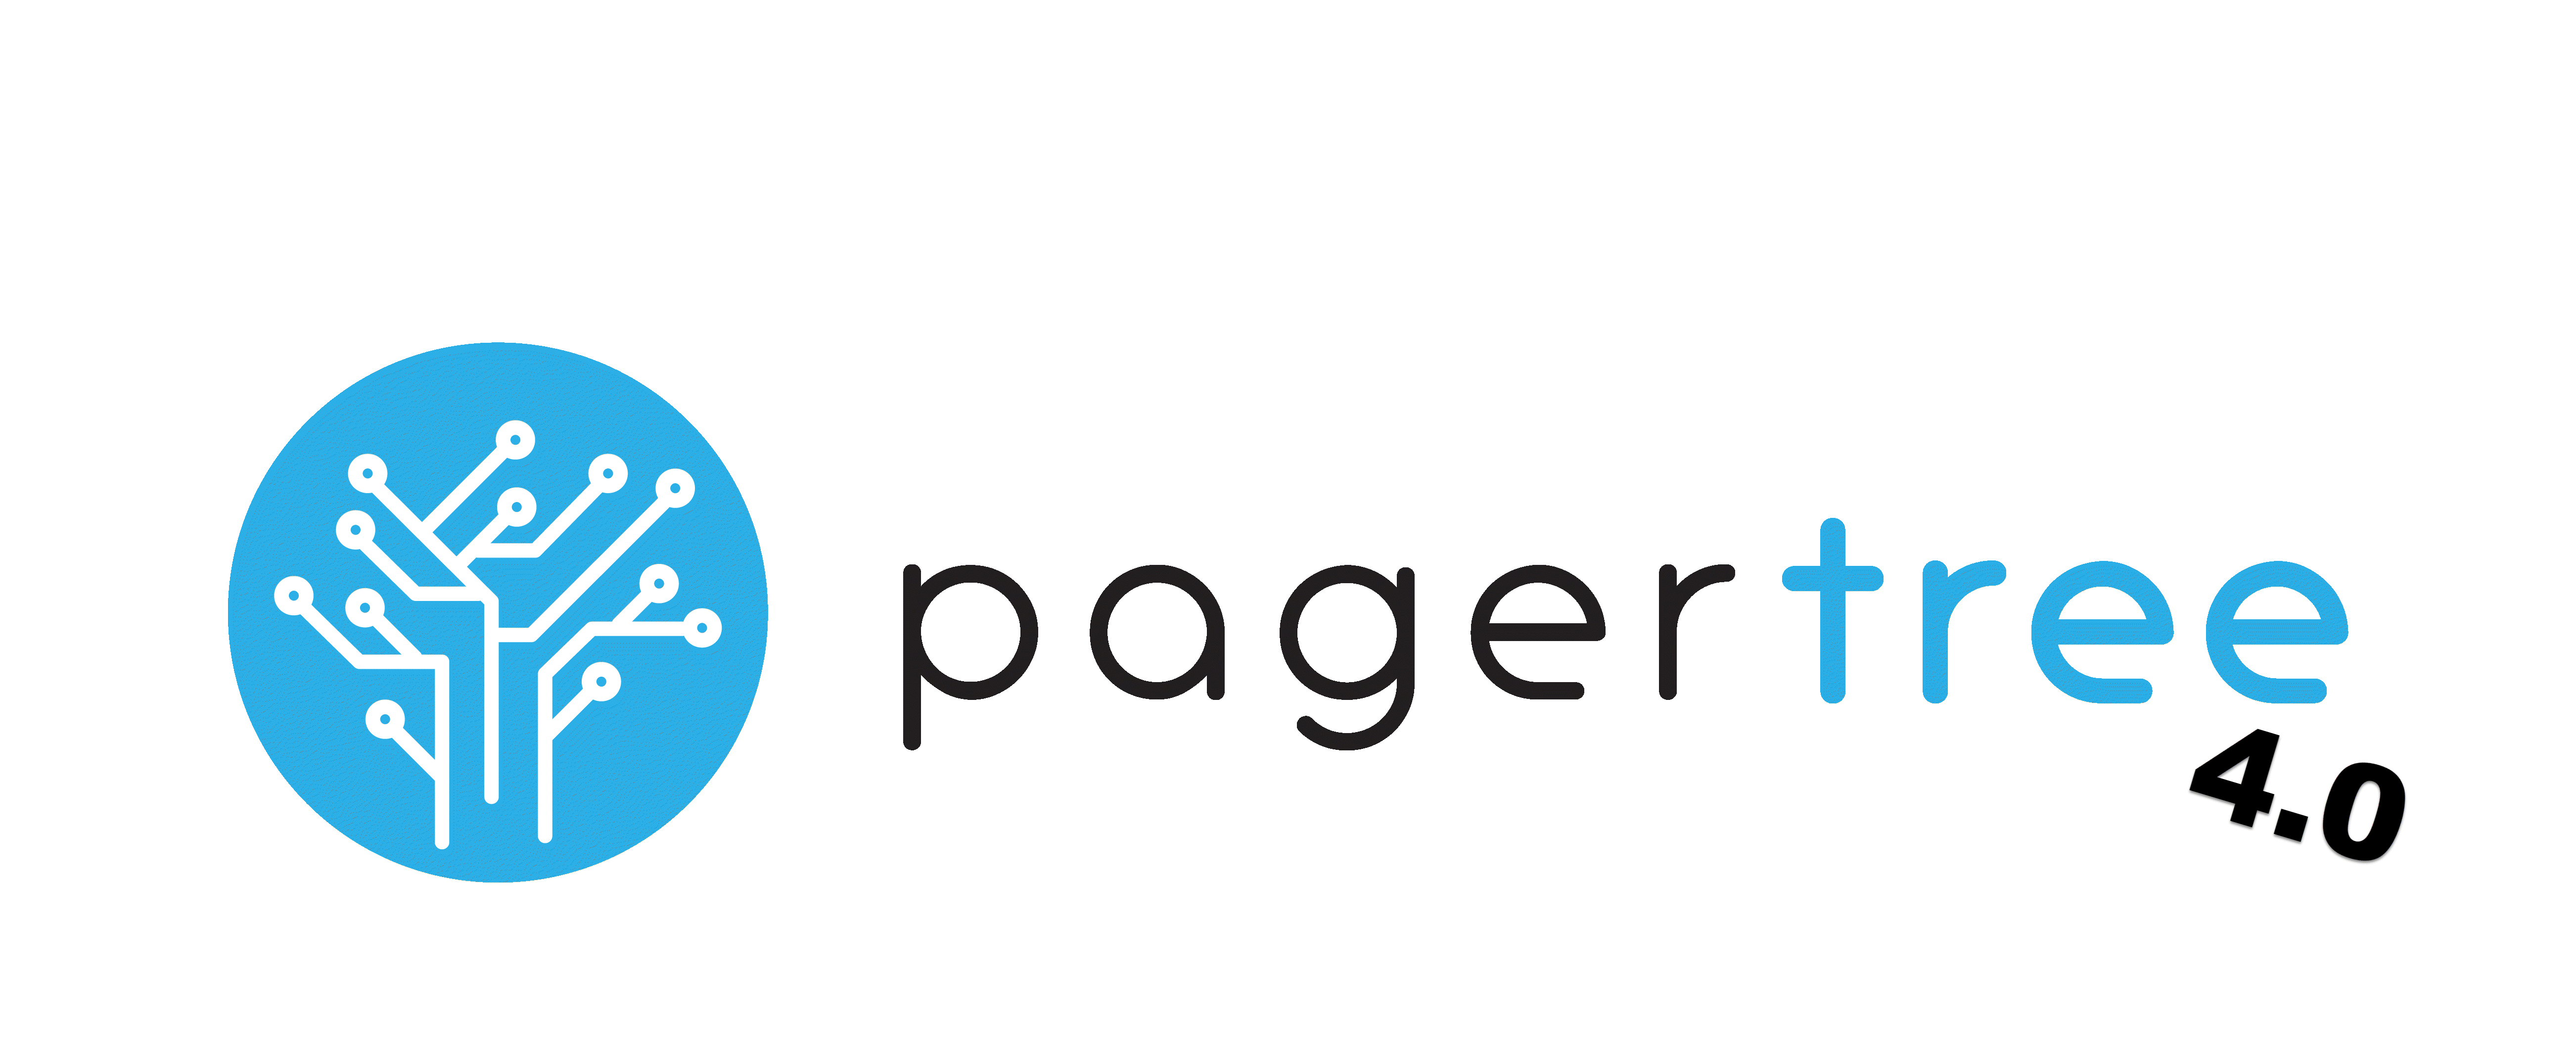 PagerTree 4